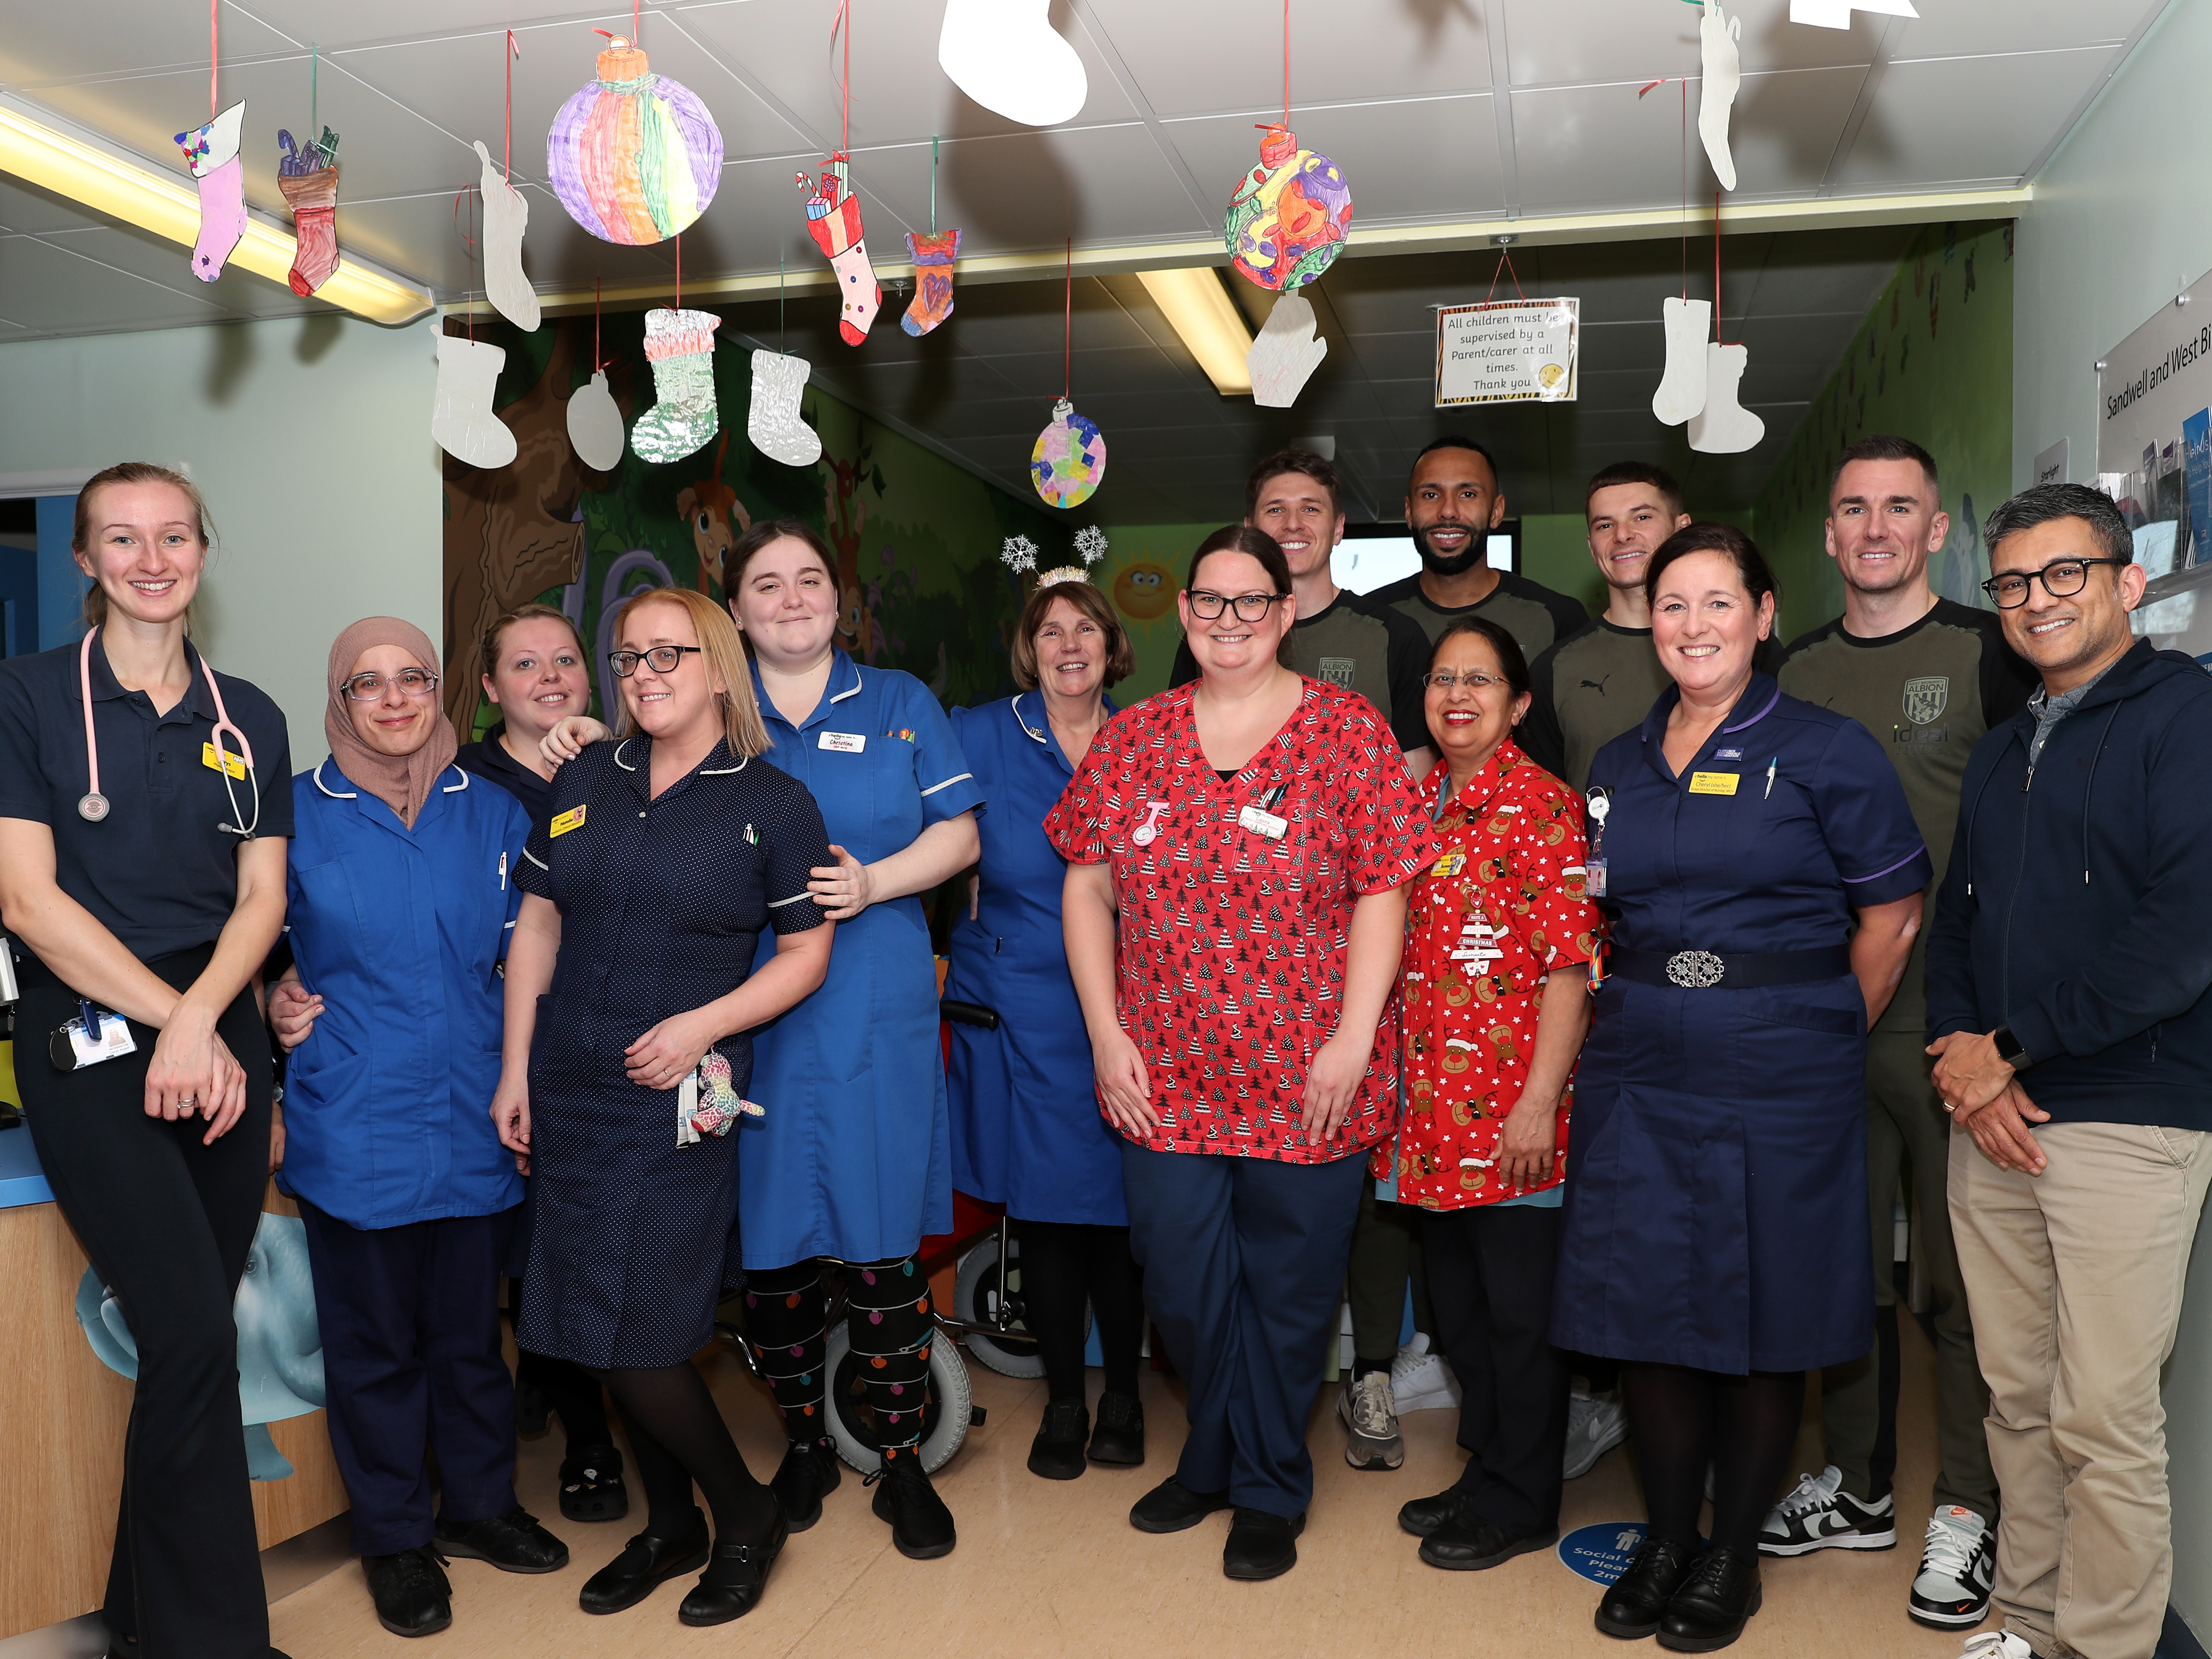 An image of Jed Wallace, Kyle Bartley, Conor Townsend & Adam Reach with staff at Sandwell General Hospital